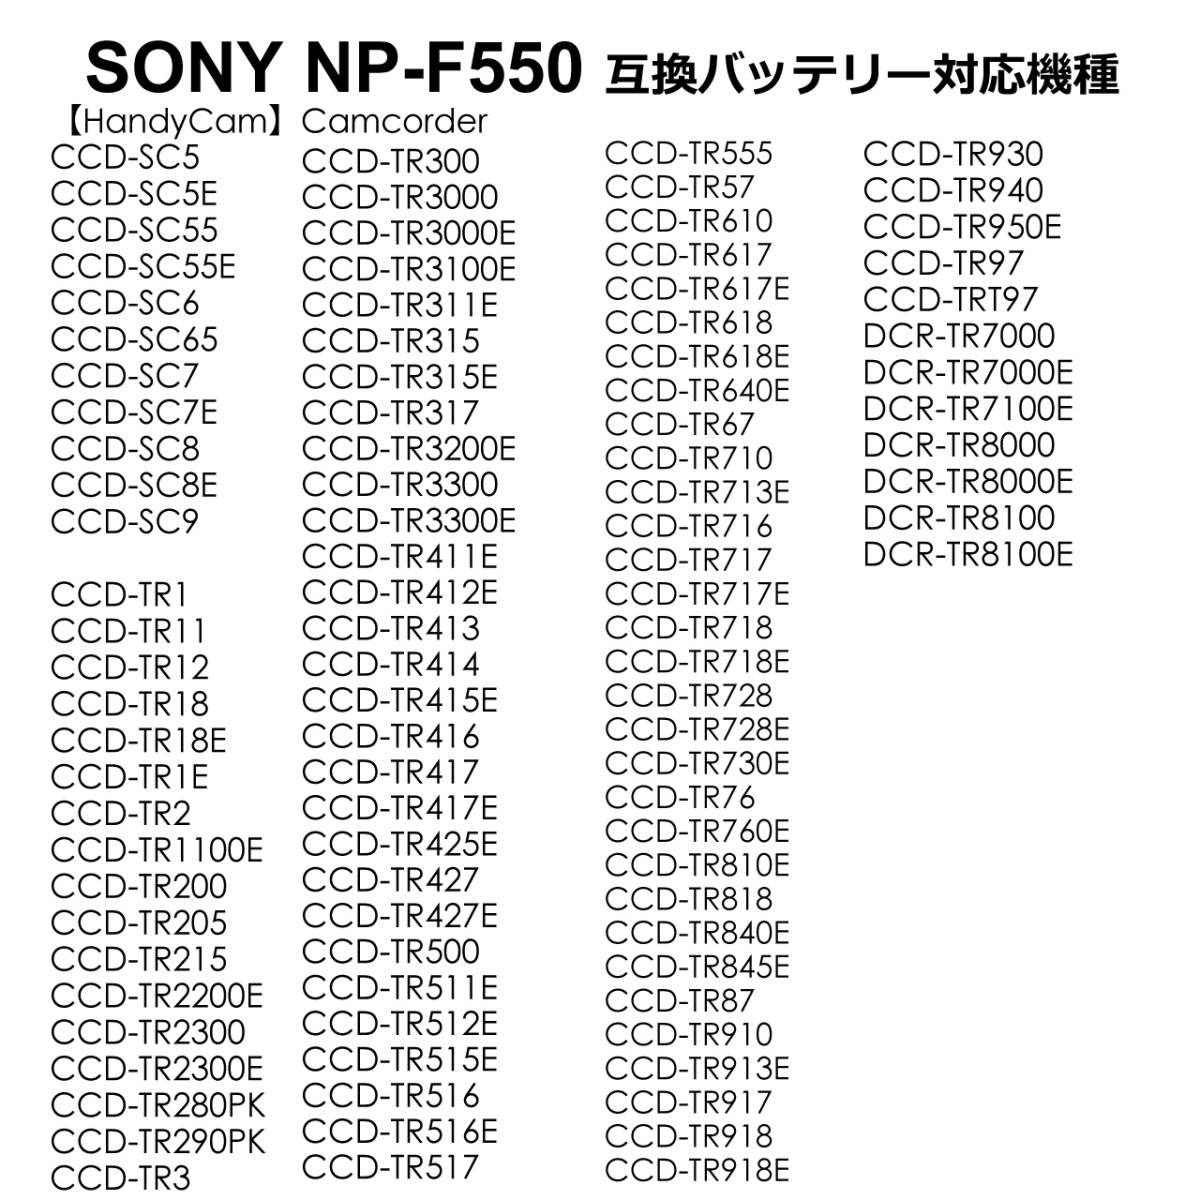 SONY NP-F550 interchangeable battery . interchangeable charger 2.1A high speed AC adaptor attaching CCD-TRV85K CCD-TRV86PK CCD-TRV91 CCD-TRV92 CCD-TRV95K DCR-SC100